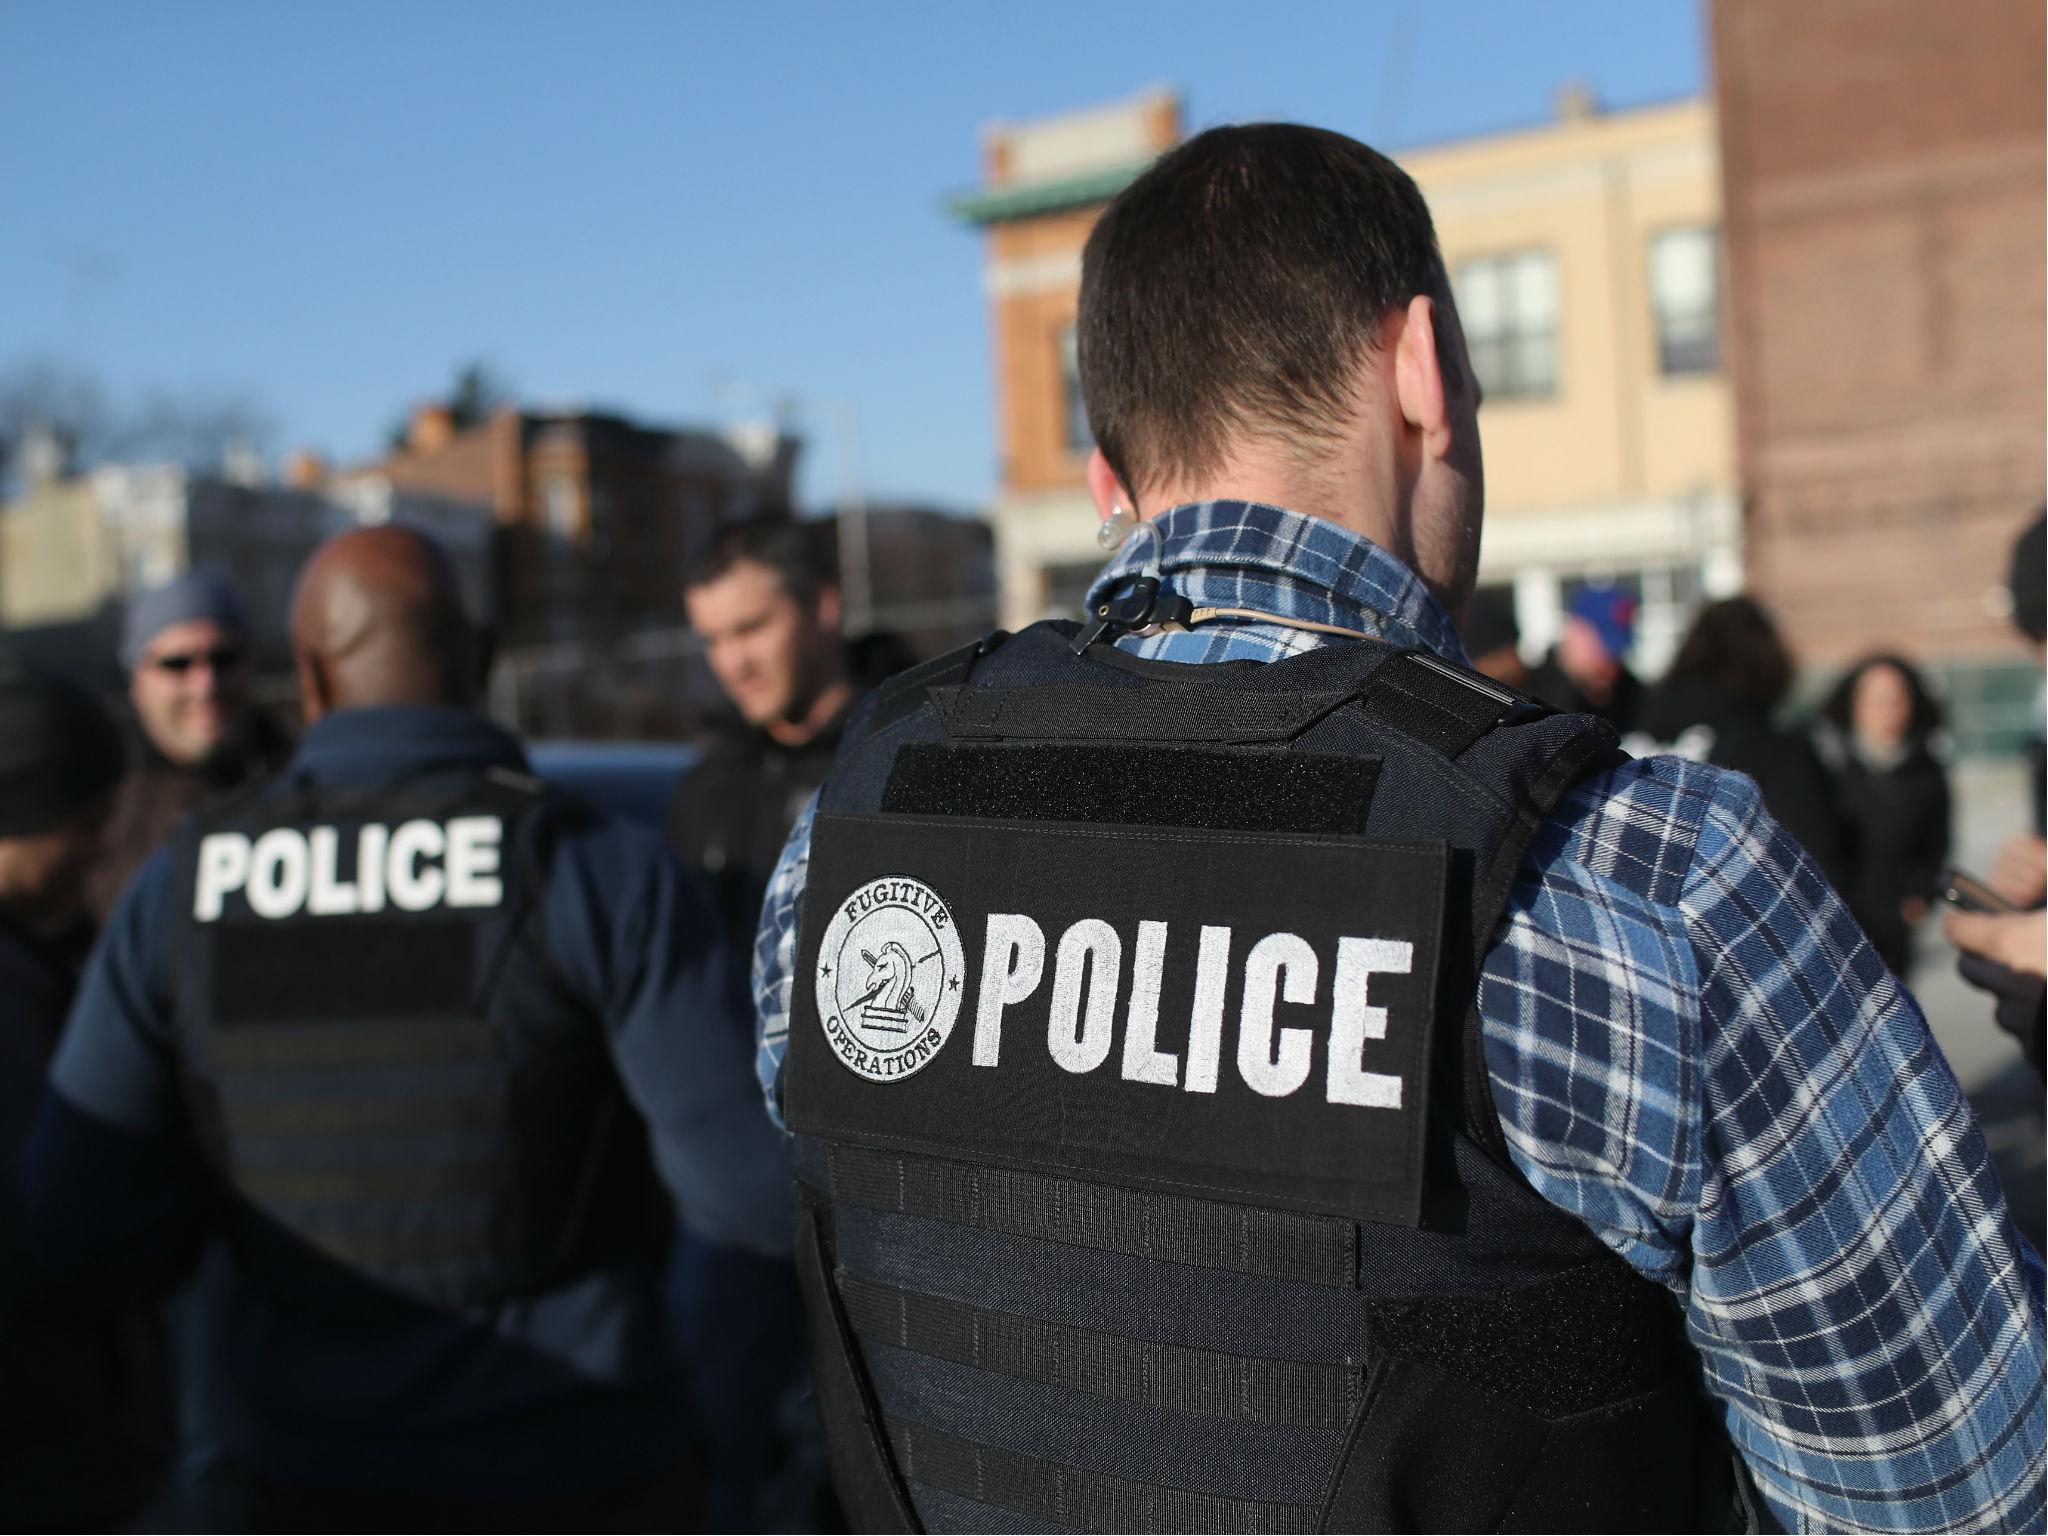 Police officers during a recent sweep for undocumented immigrants in New York City